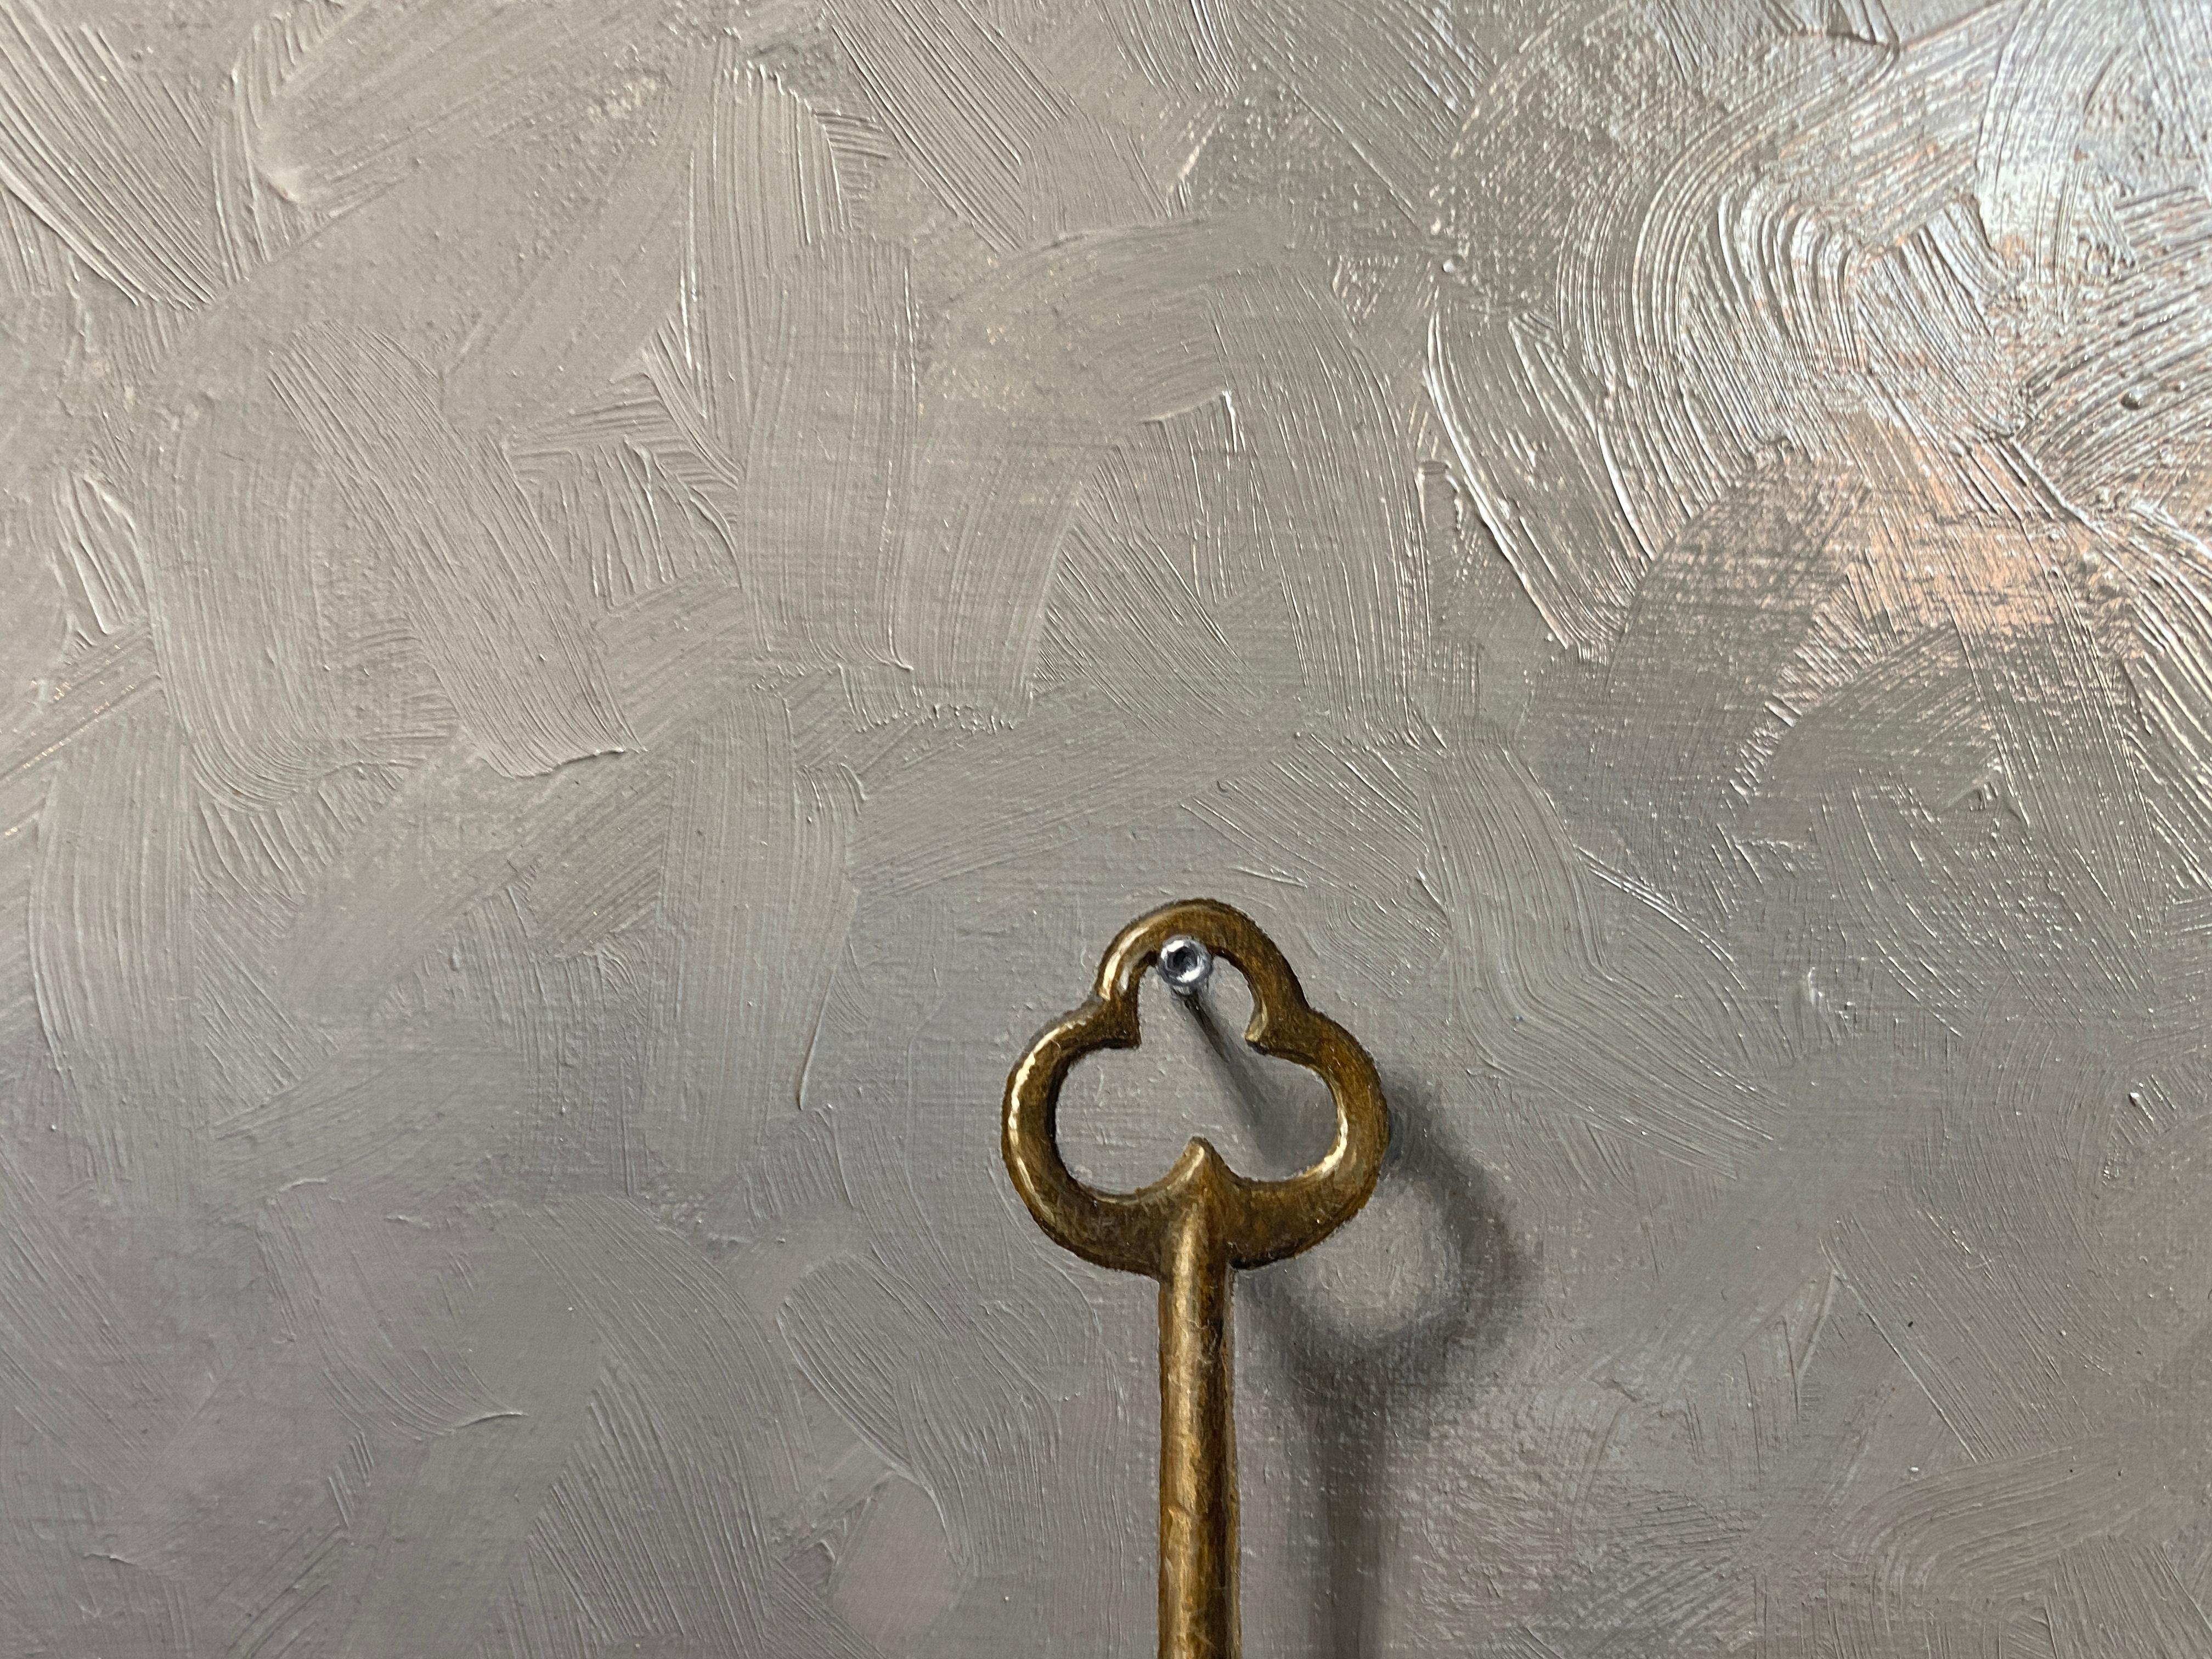 An oil painting of a gold antique key, hanging from a nail, against a grey background. Painted in the realist style, a trompe l'oeil, or to trick the eye. Brushstrokes can be found in the background. 

Painting dimensions: 9 x 7 inches
Framed